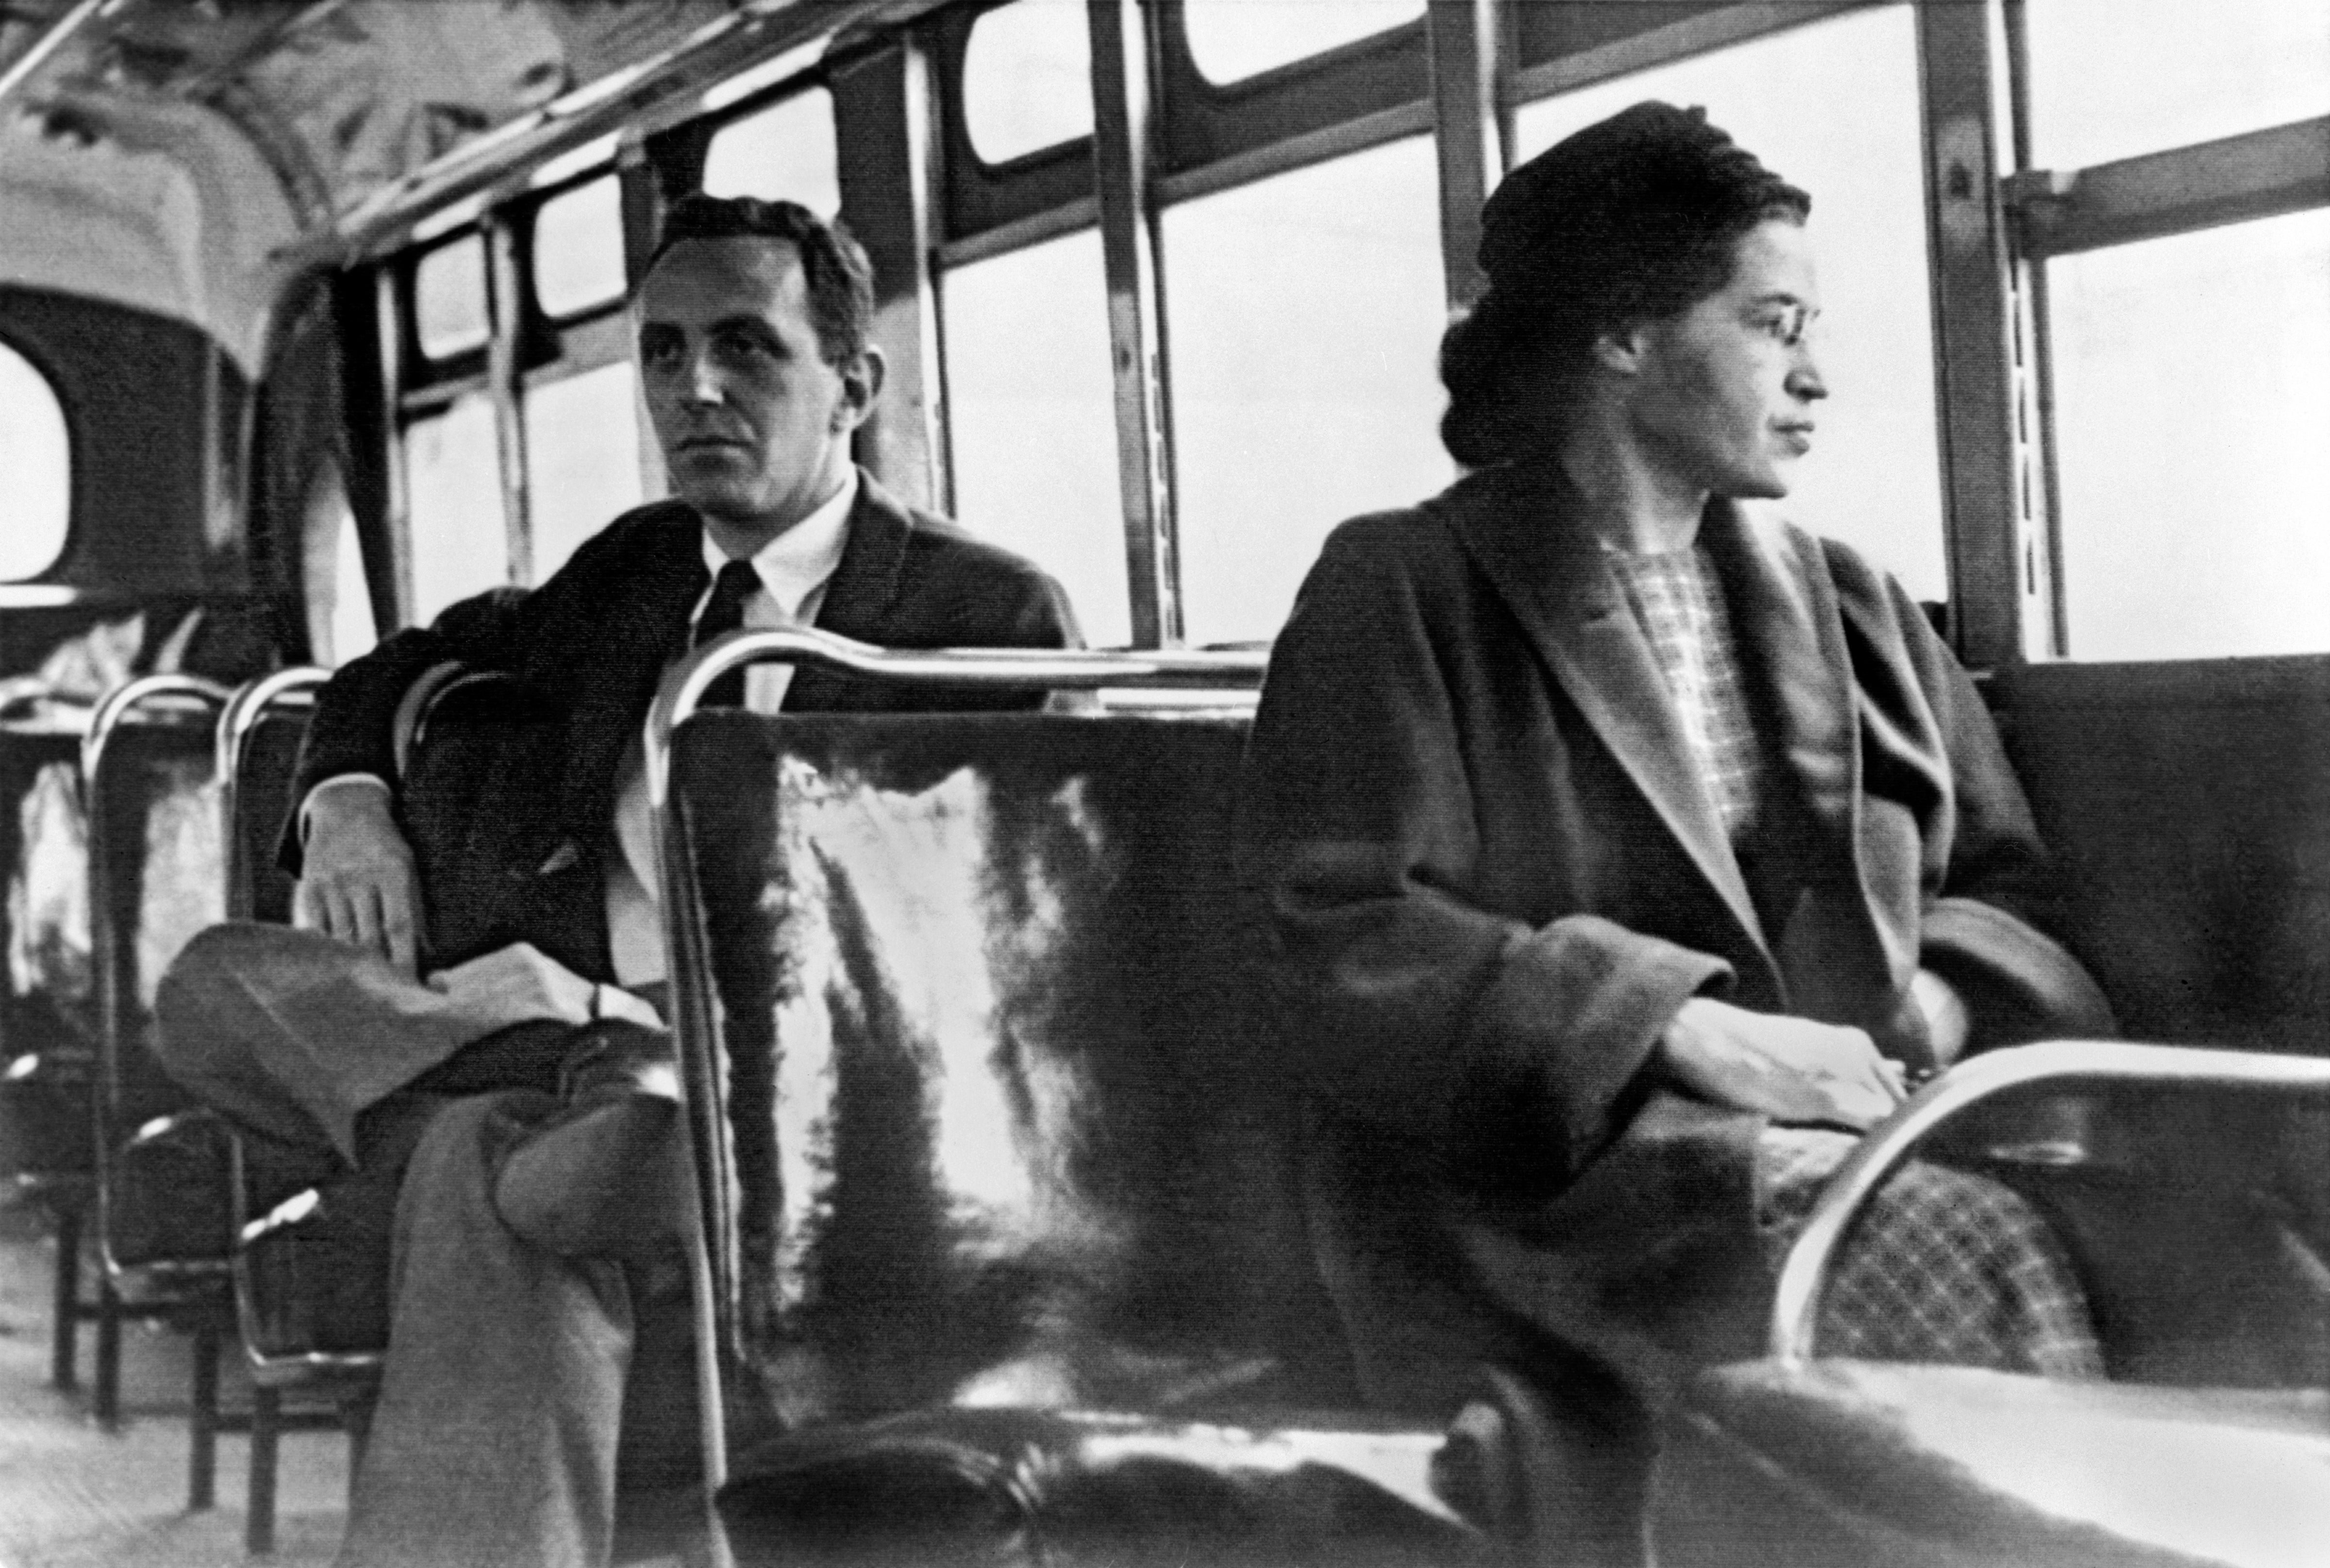 ROSA PARKS sitting on a bus